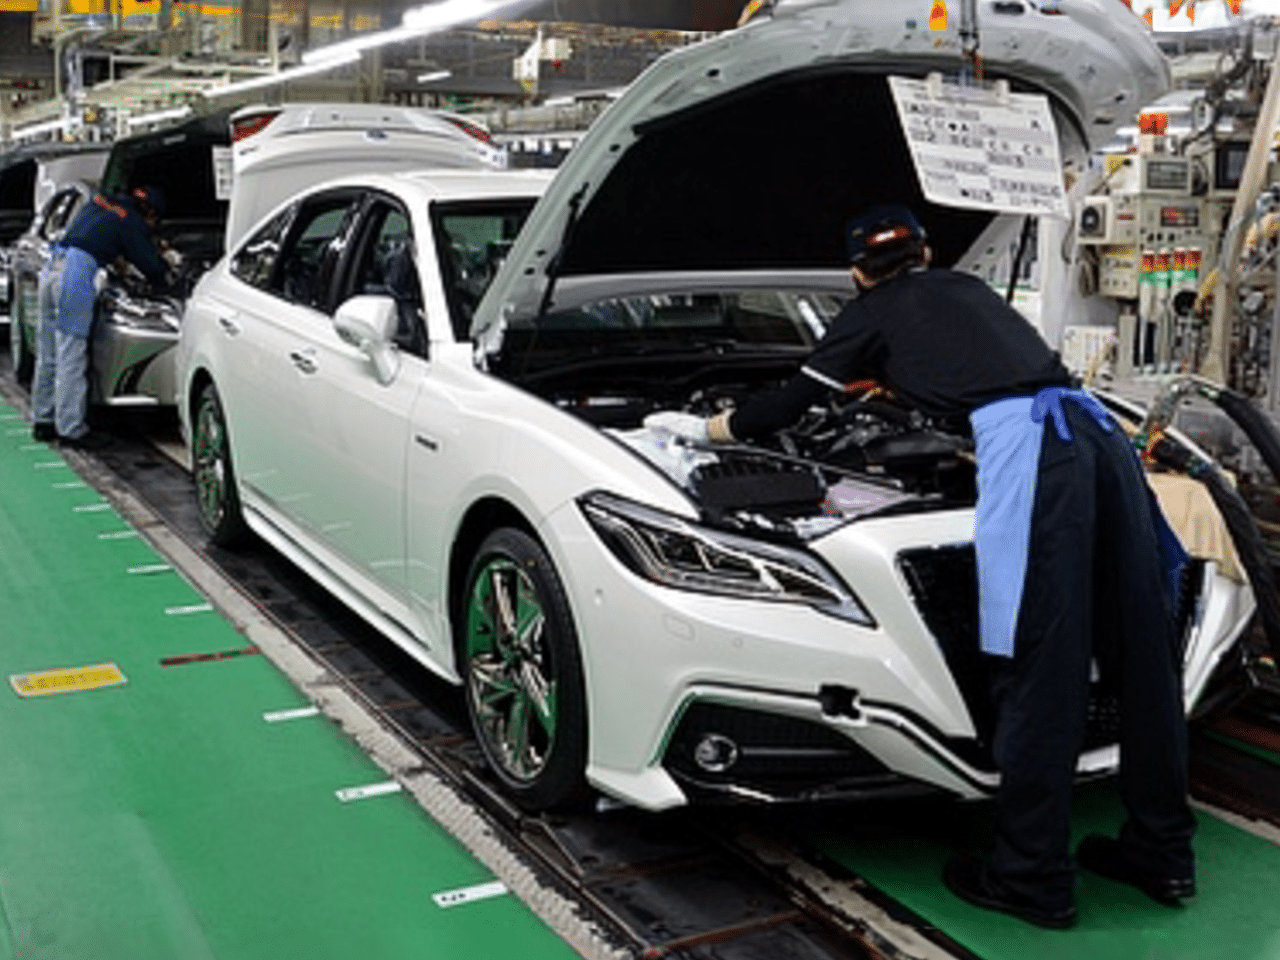 Toyota Forced to Suspend Production at All Japanese Plants Due to System Malfunction